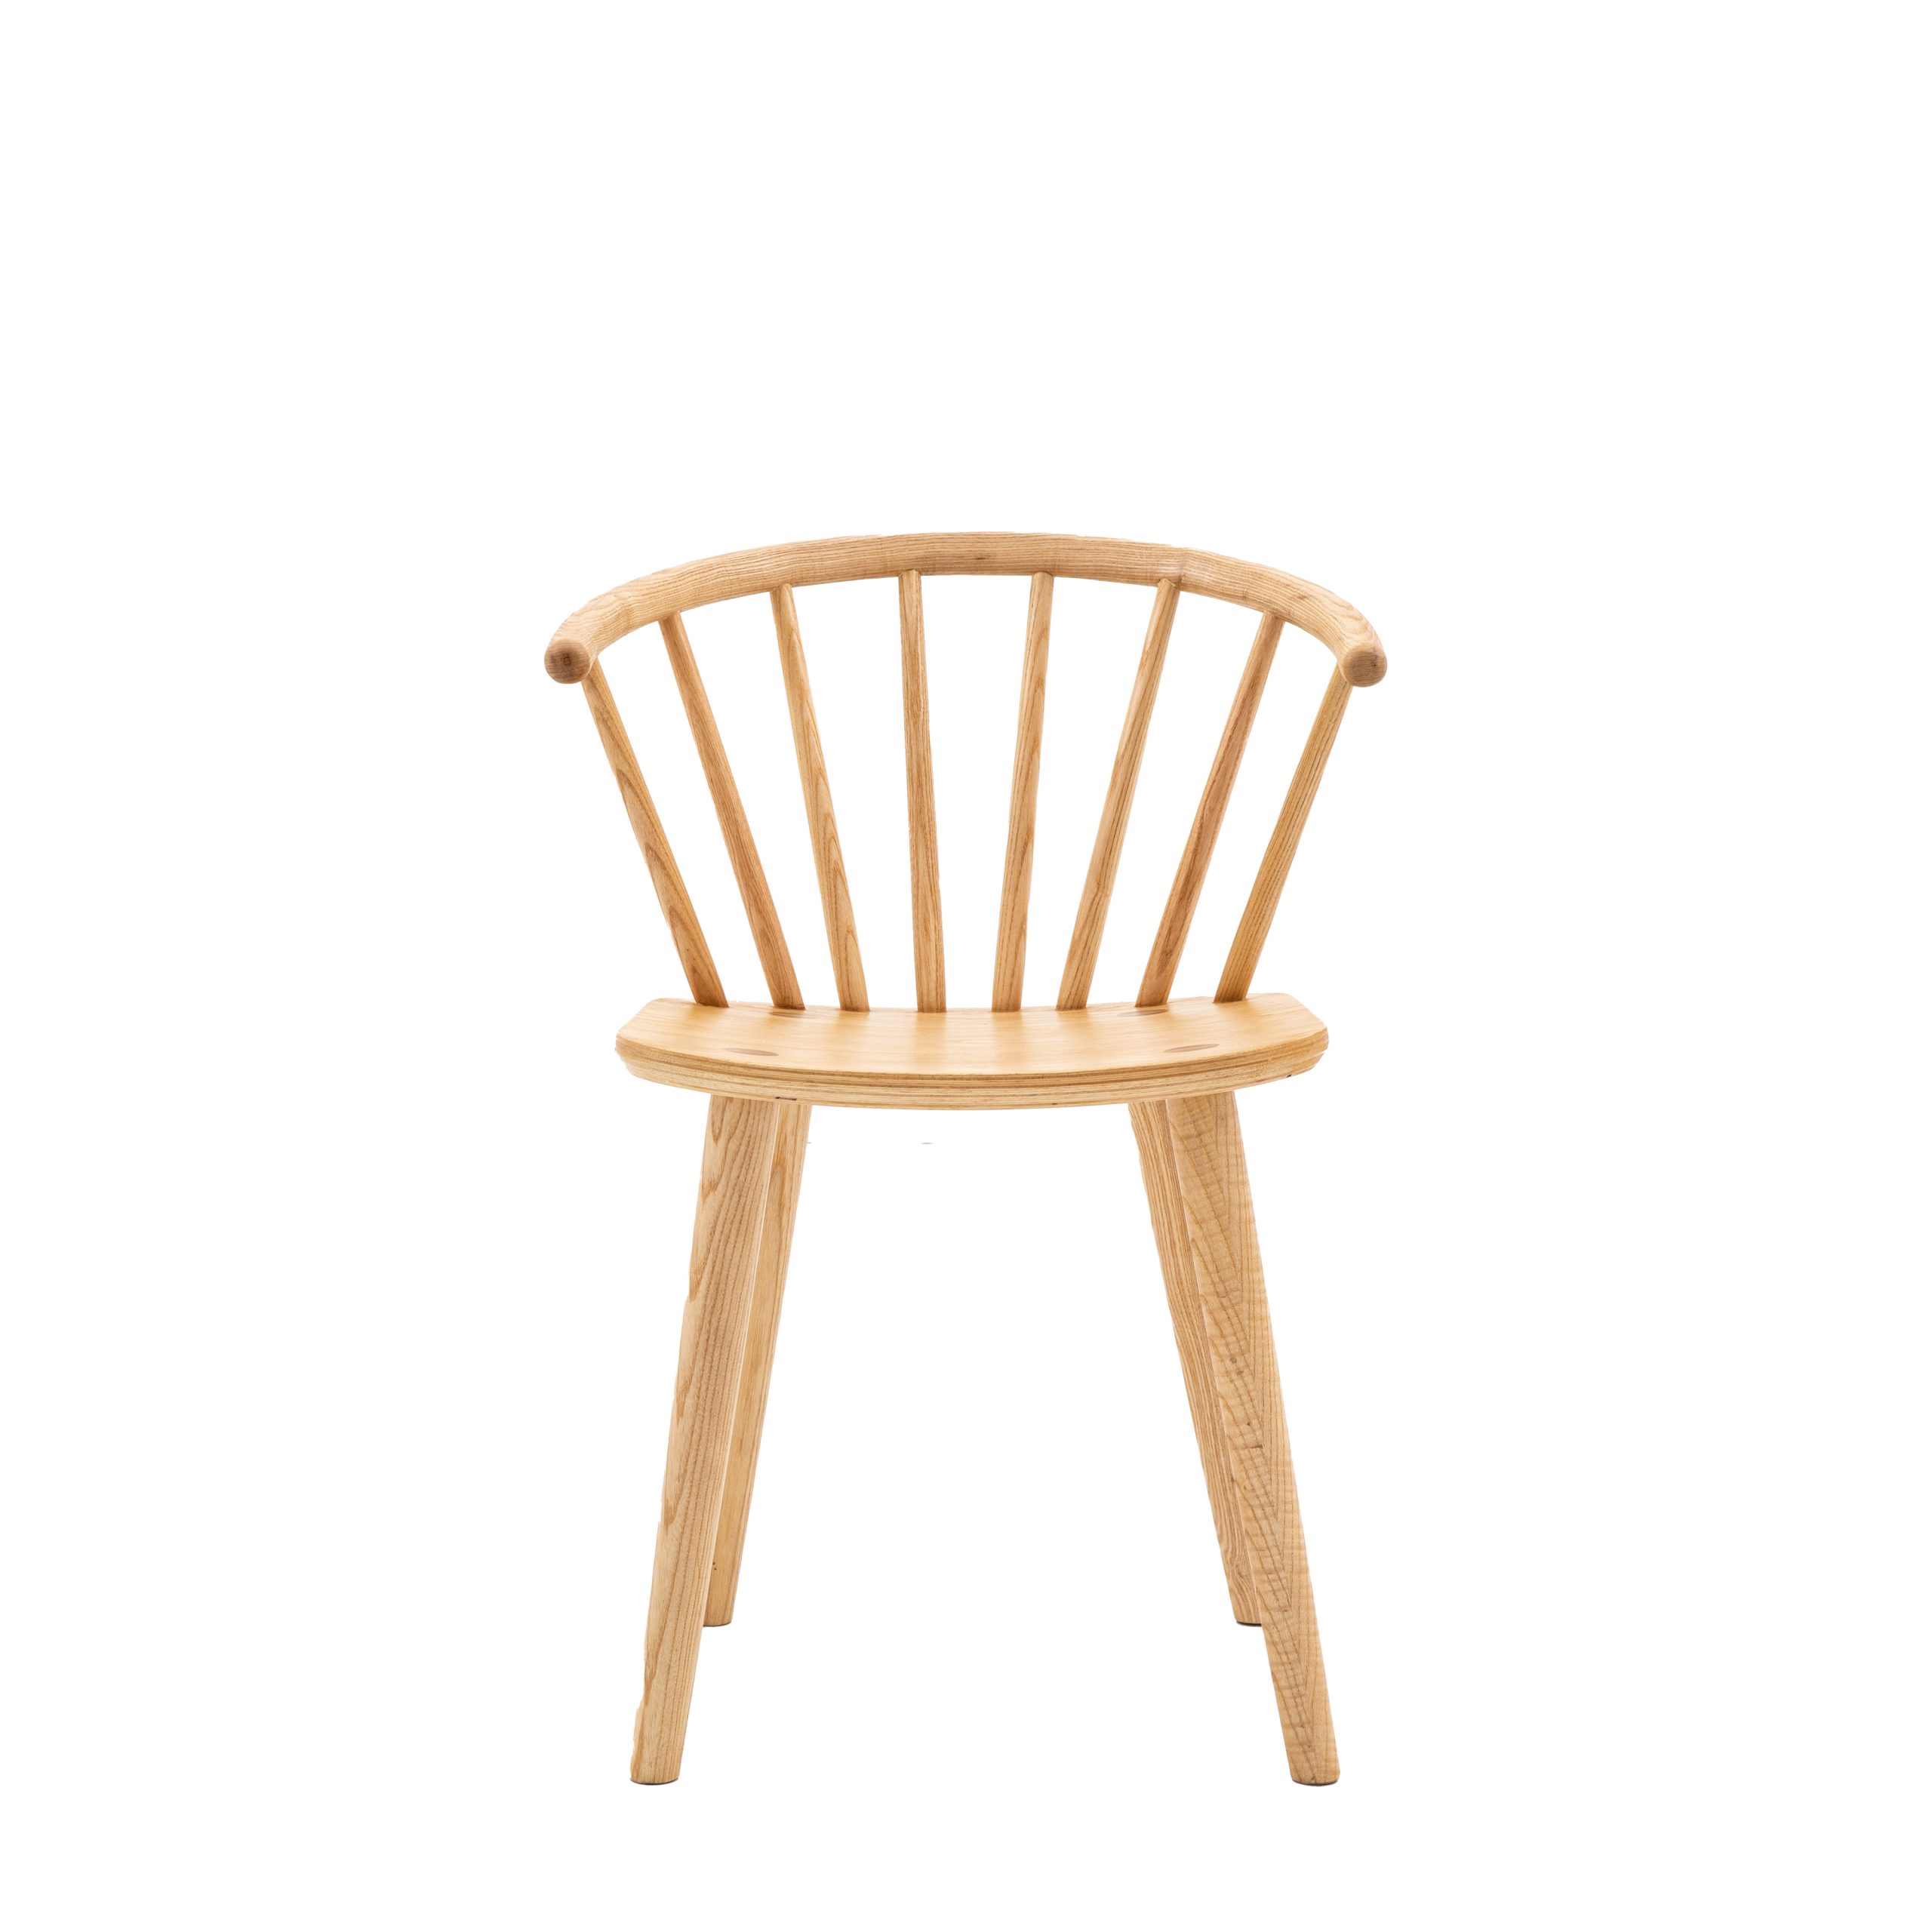 Gallery Direct Craft Dining Chair Natural (Set of 2)